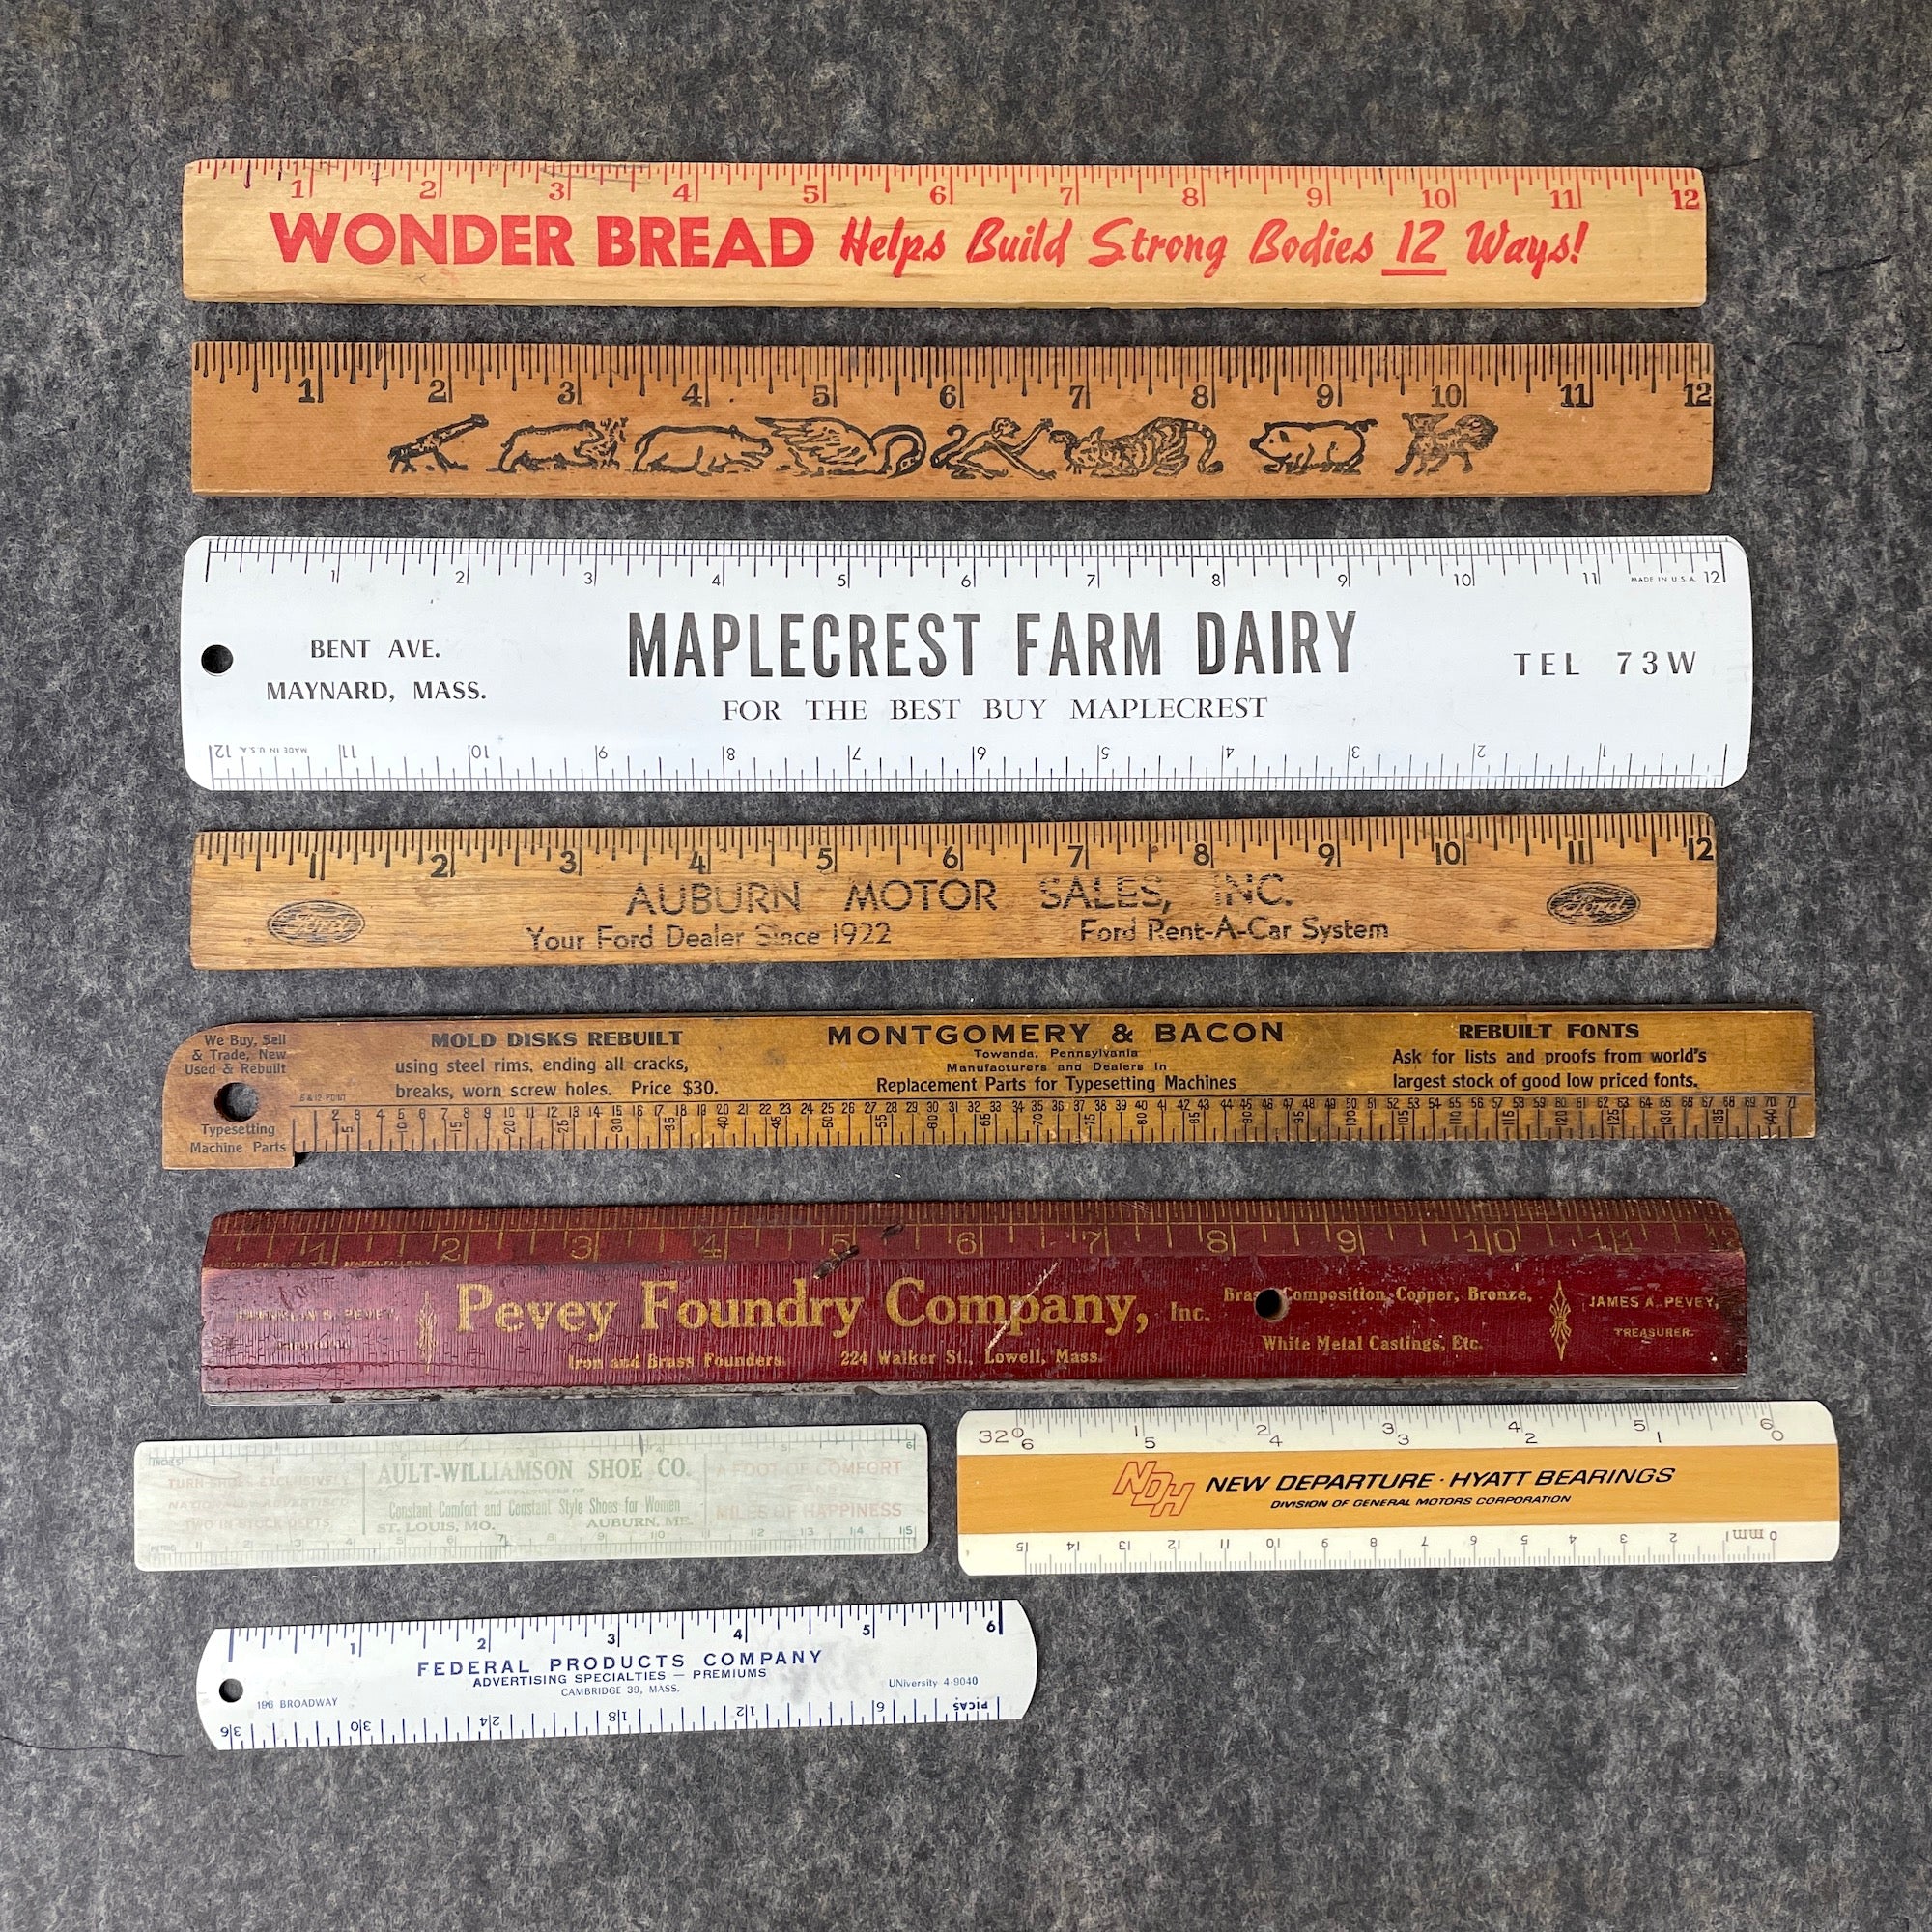 Two (2) Vintage Wooden Rulers- Smokey's Friends Don't Play With Matches